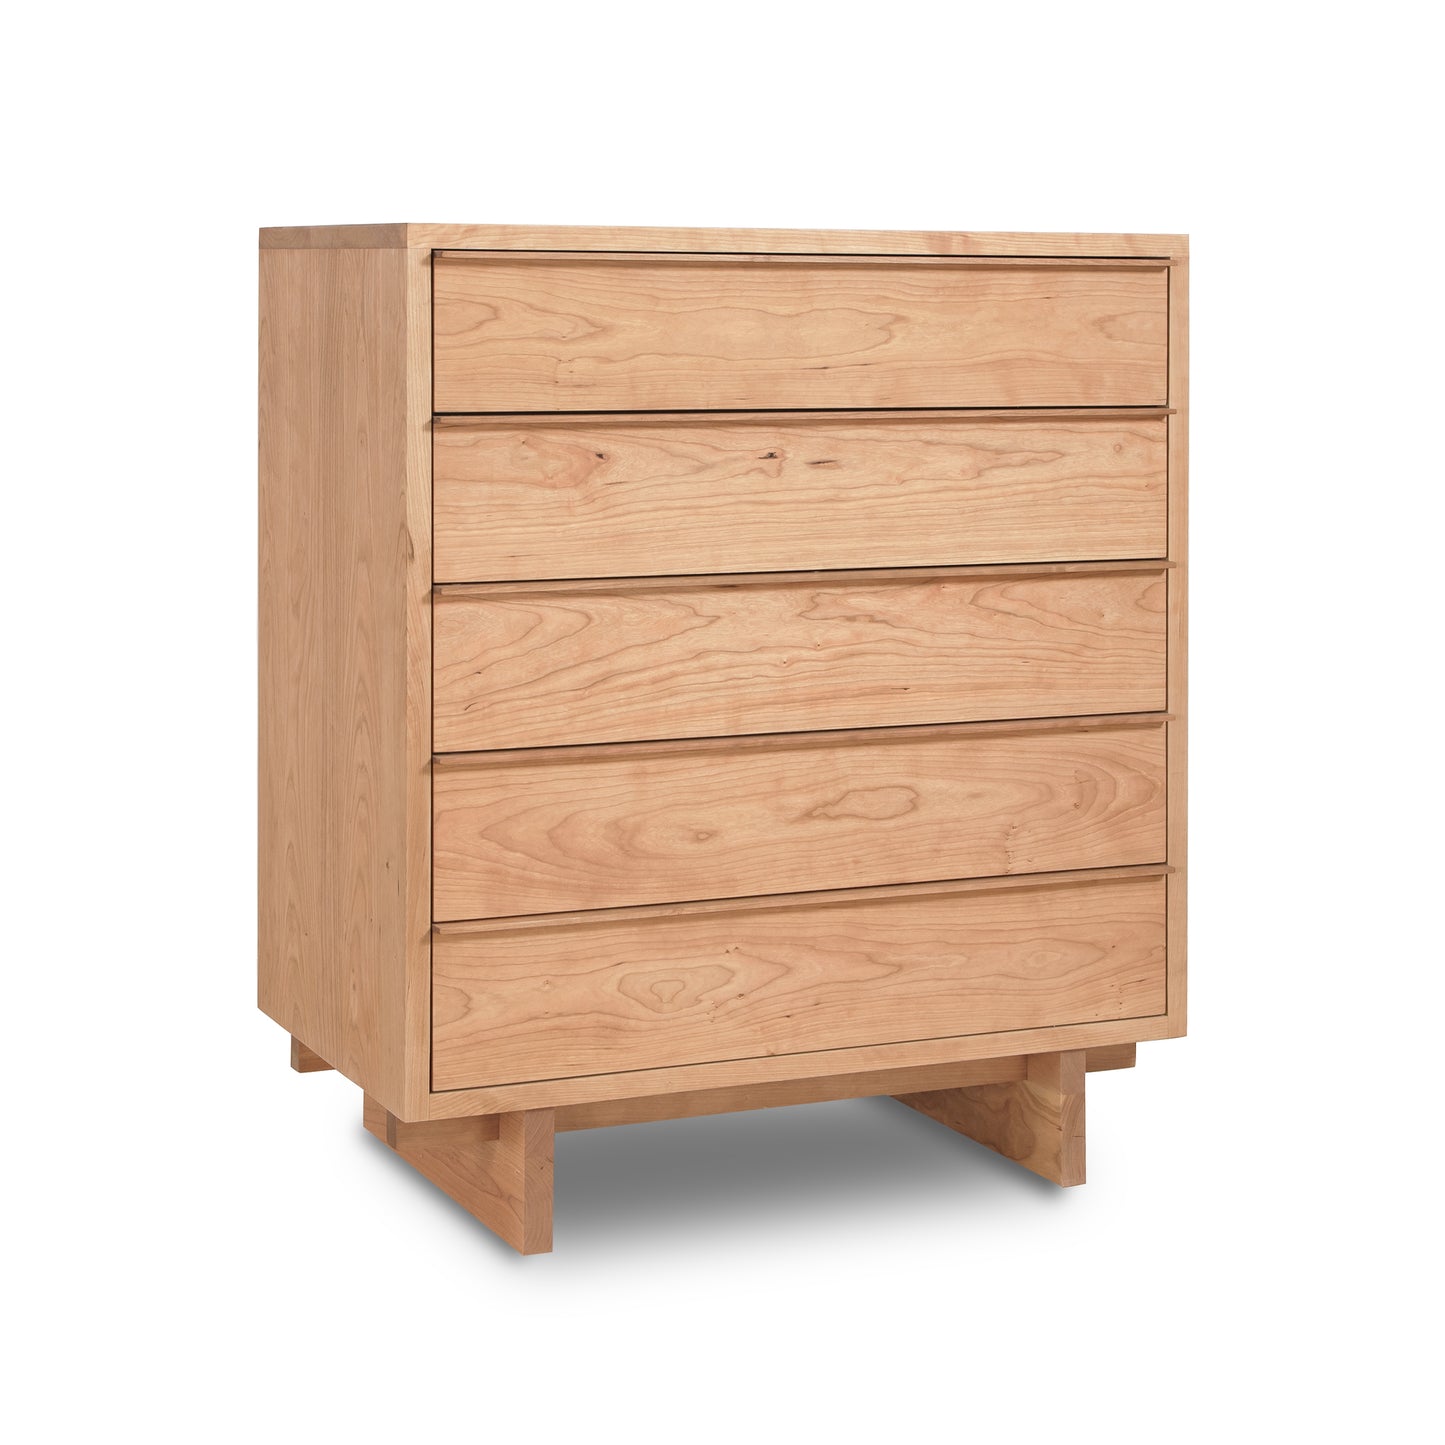 A modern wooden dresser, known as the Vermont Furniture Designs Kipling 5-Drawer Wide Chest, with four drawers, isolated on a white background.